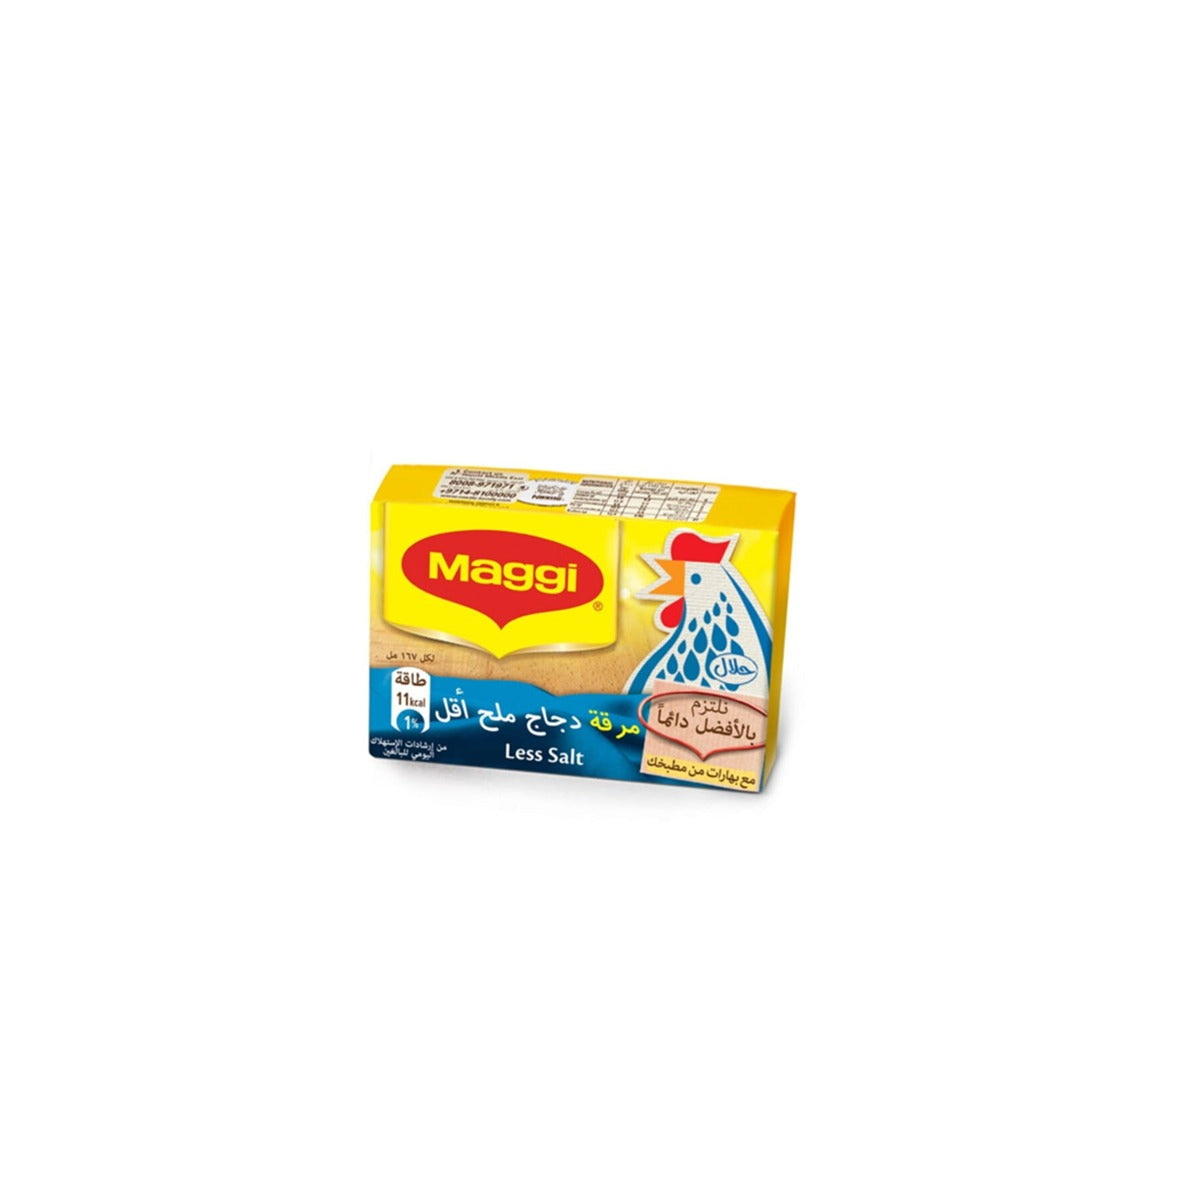 Maggi - Chicken Stock 24 Cubes - 480 g - Continental Food Store